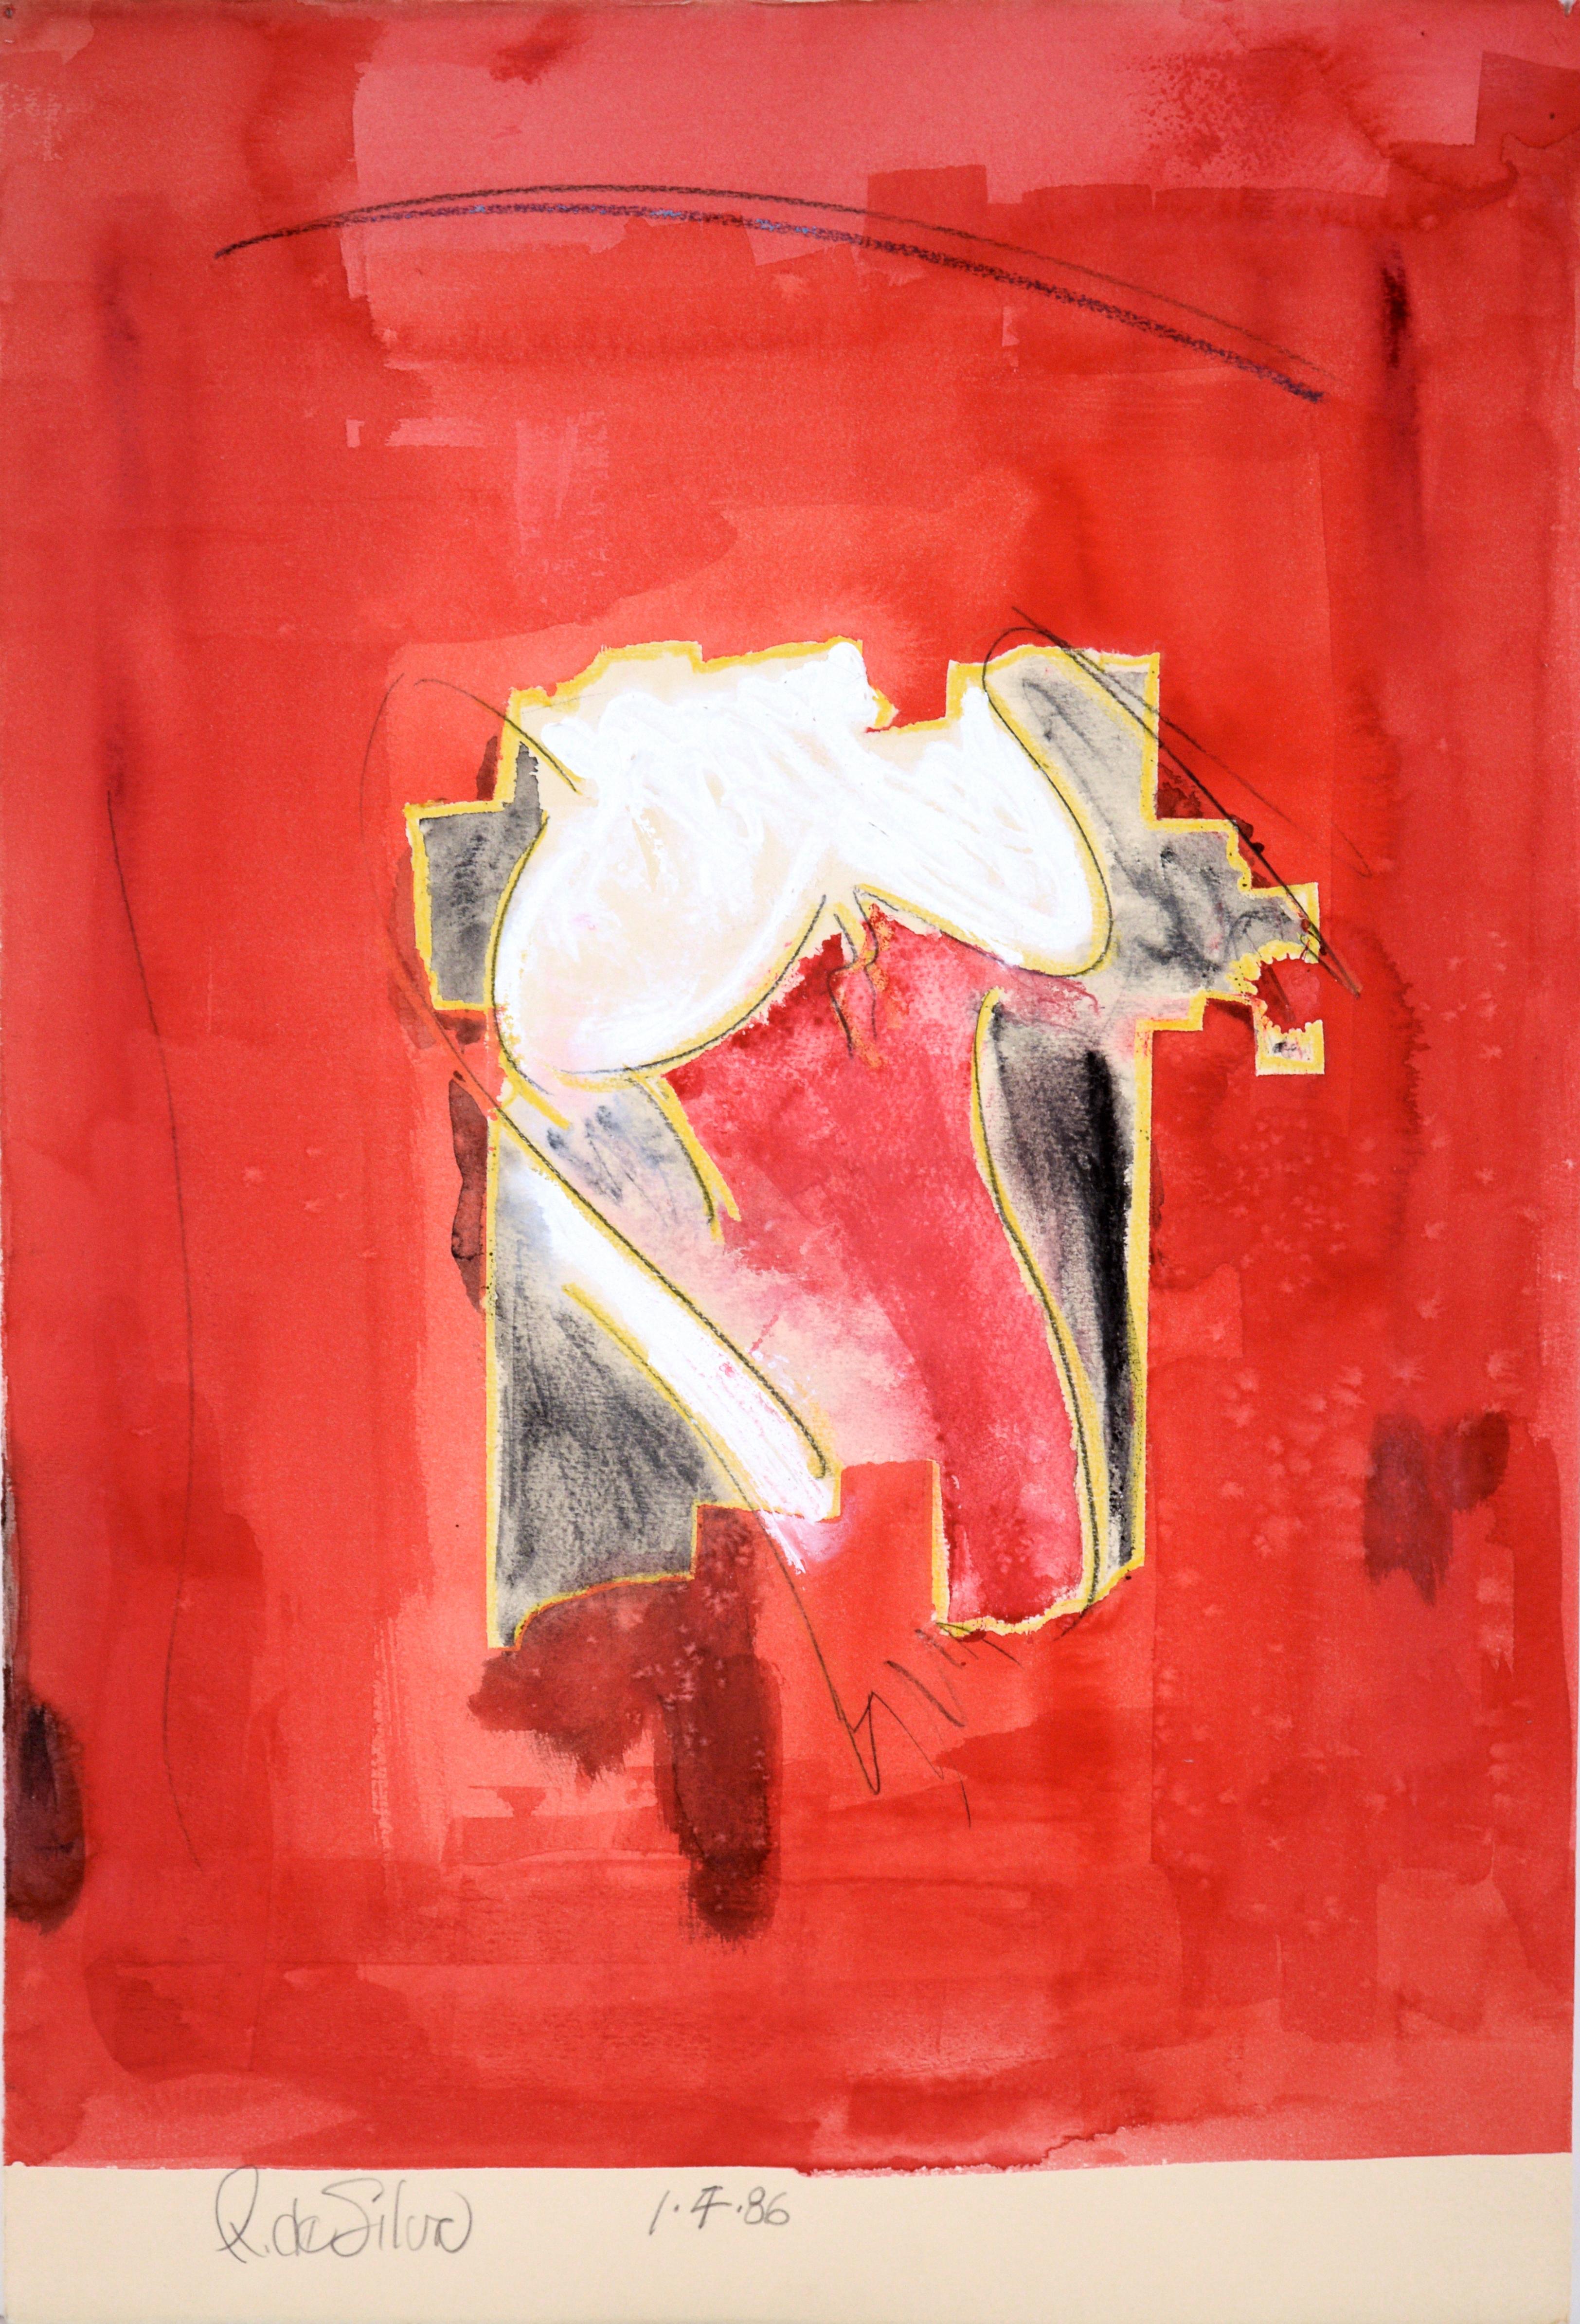 Ricardo de Silva Abstract Painting - Red Bodice Nude Abstract 